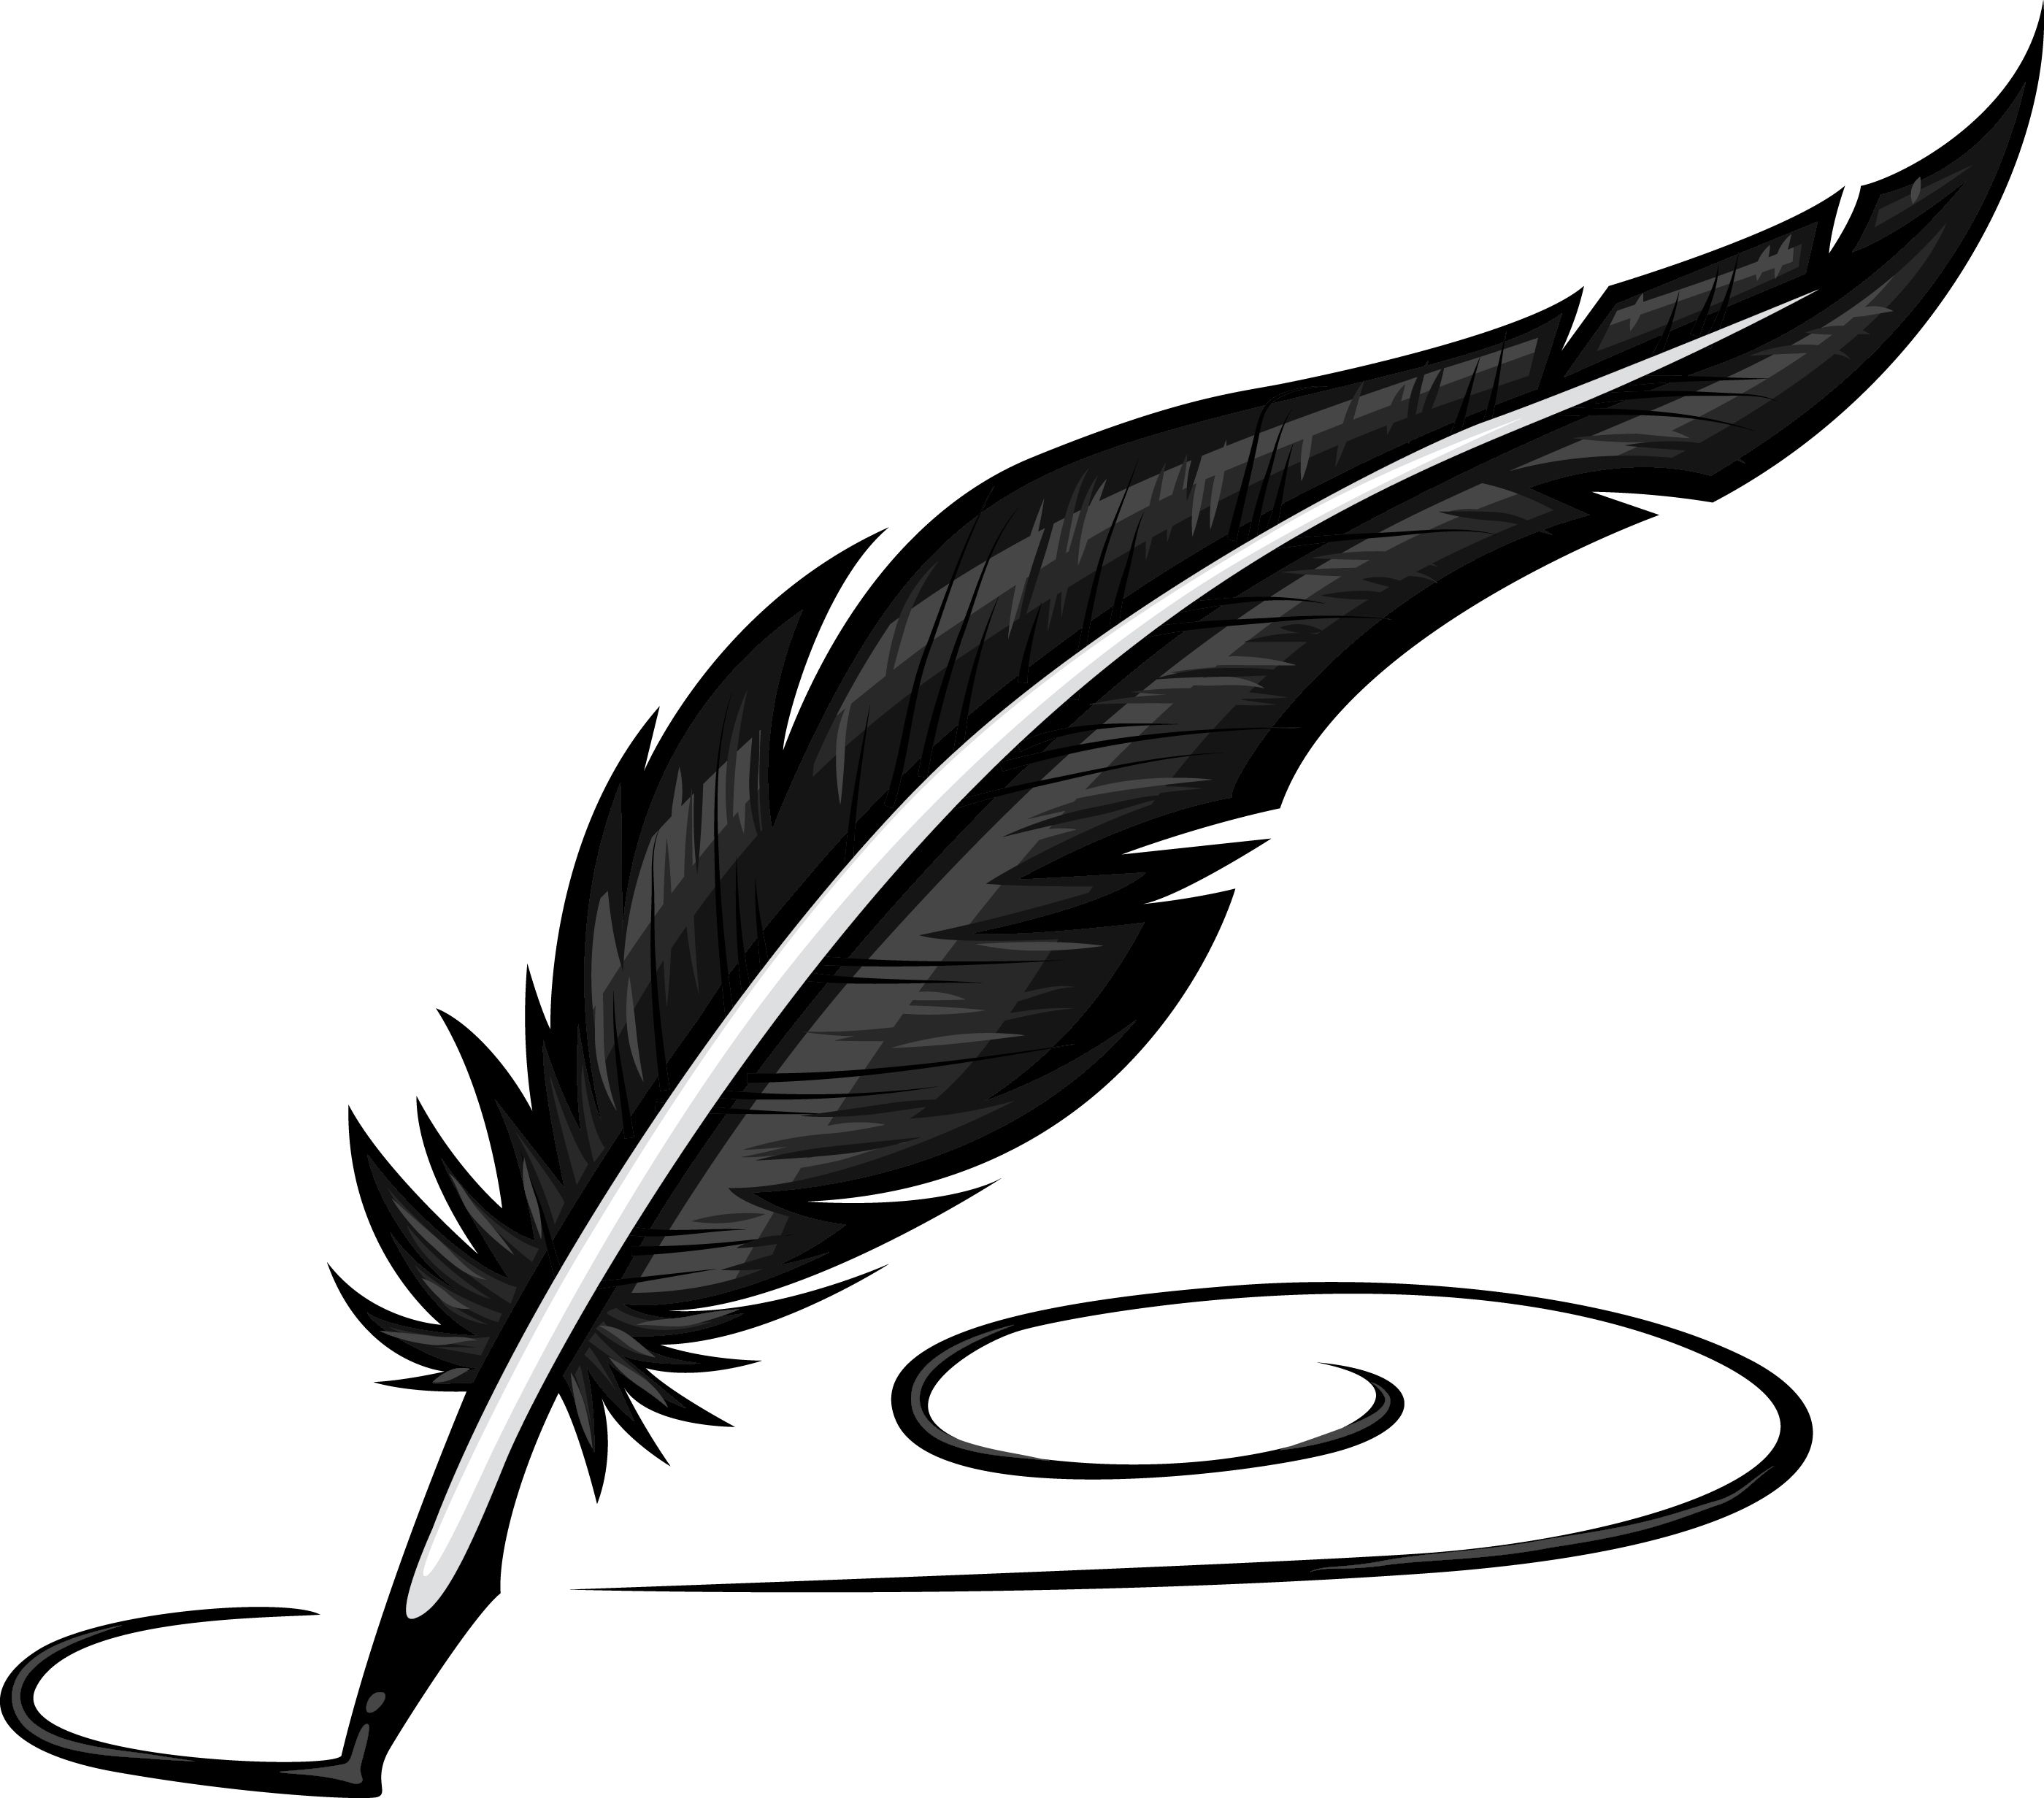 Quill clipart black.